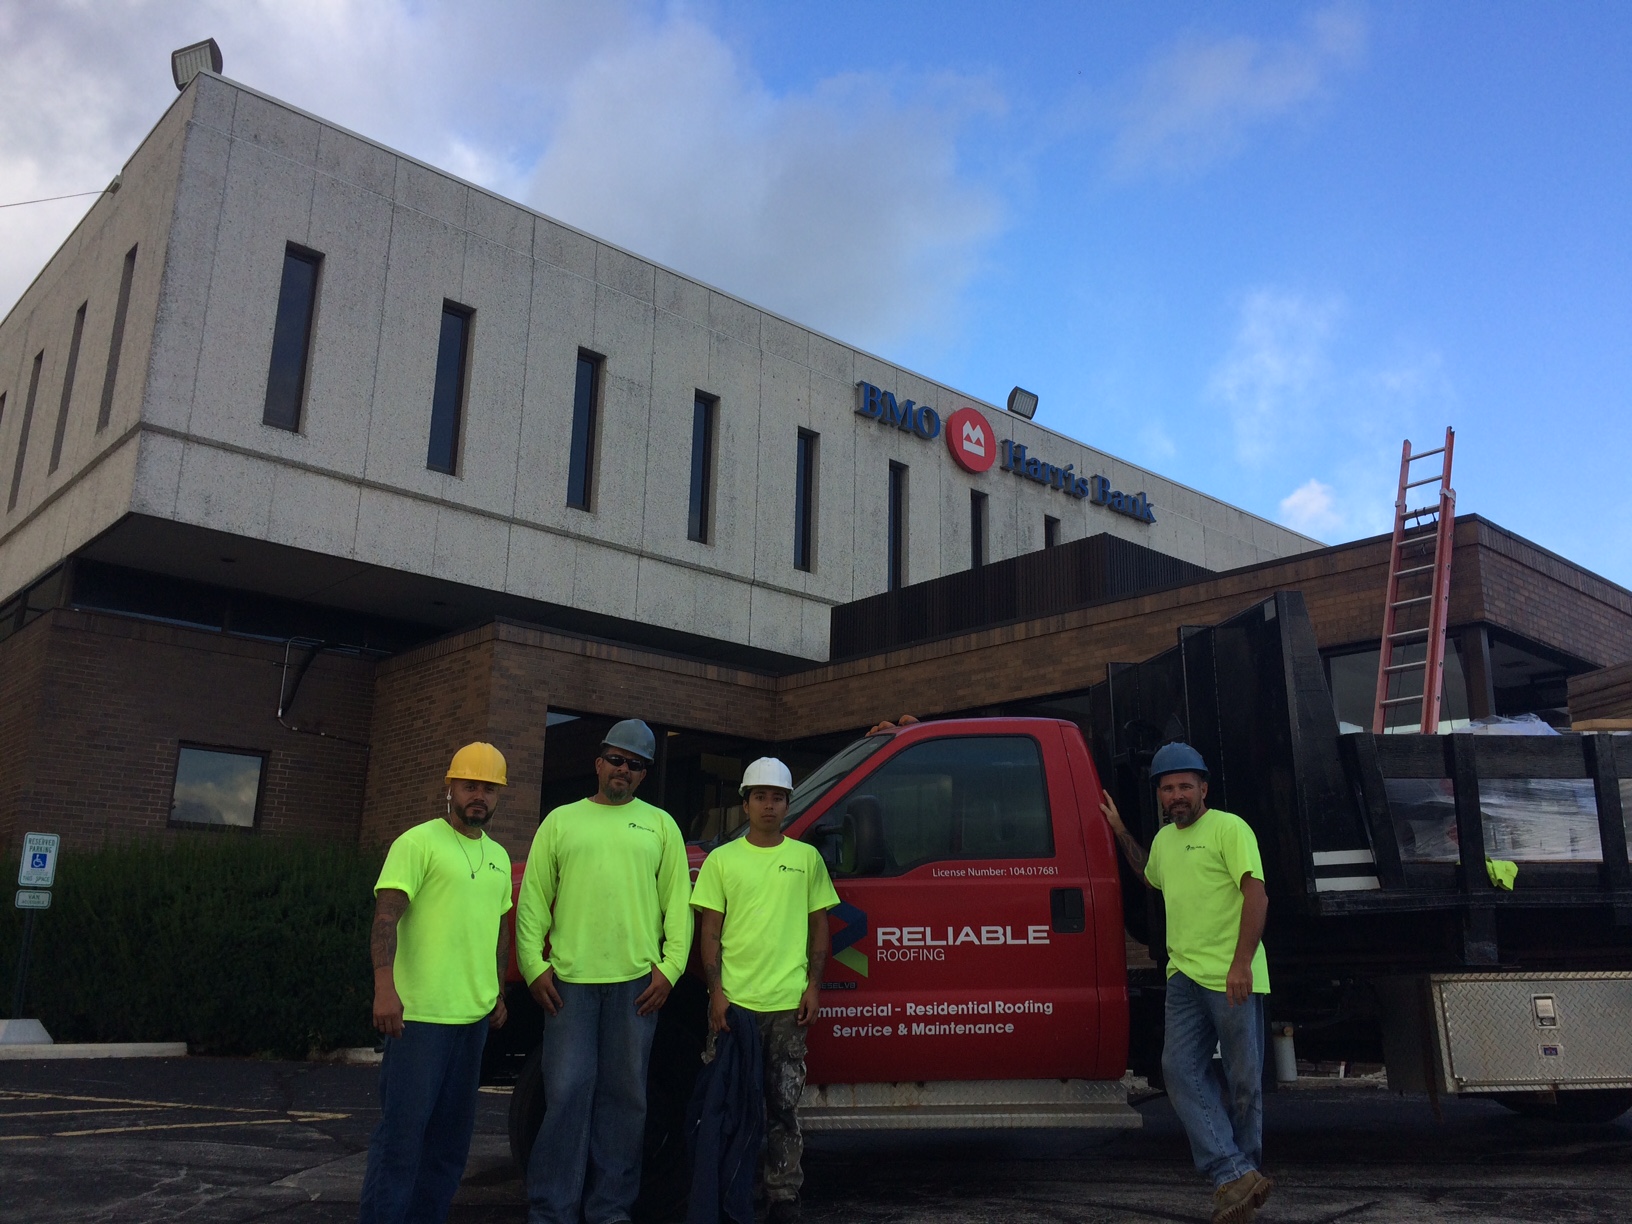 Reliable-Roofing-Team-Truck-BMO-Harris-Bank